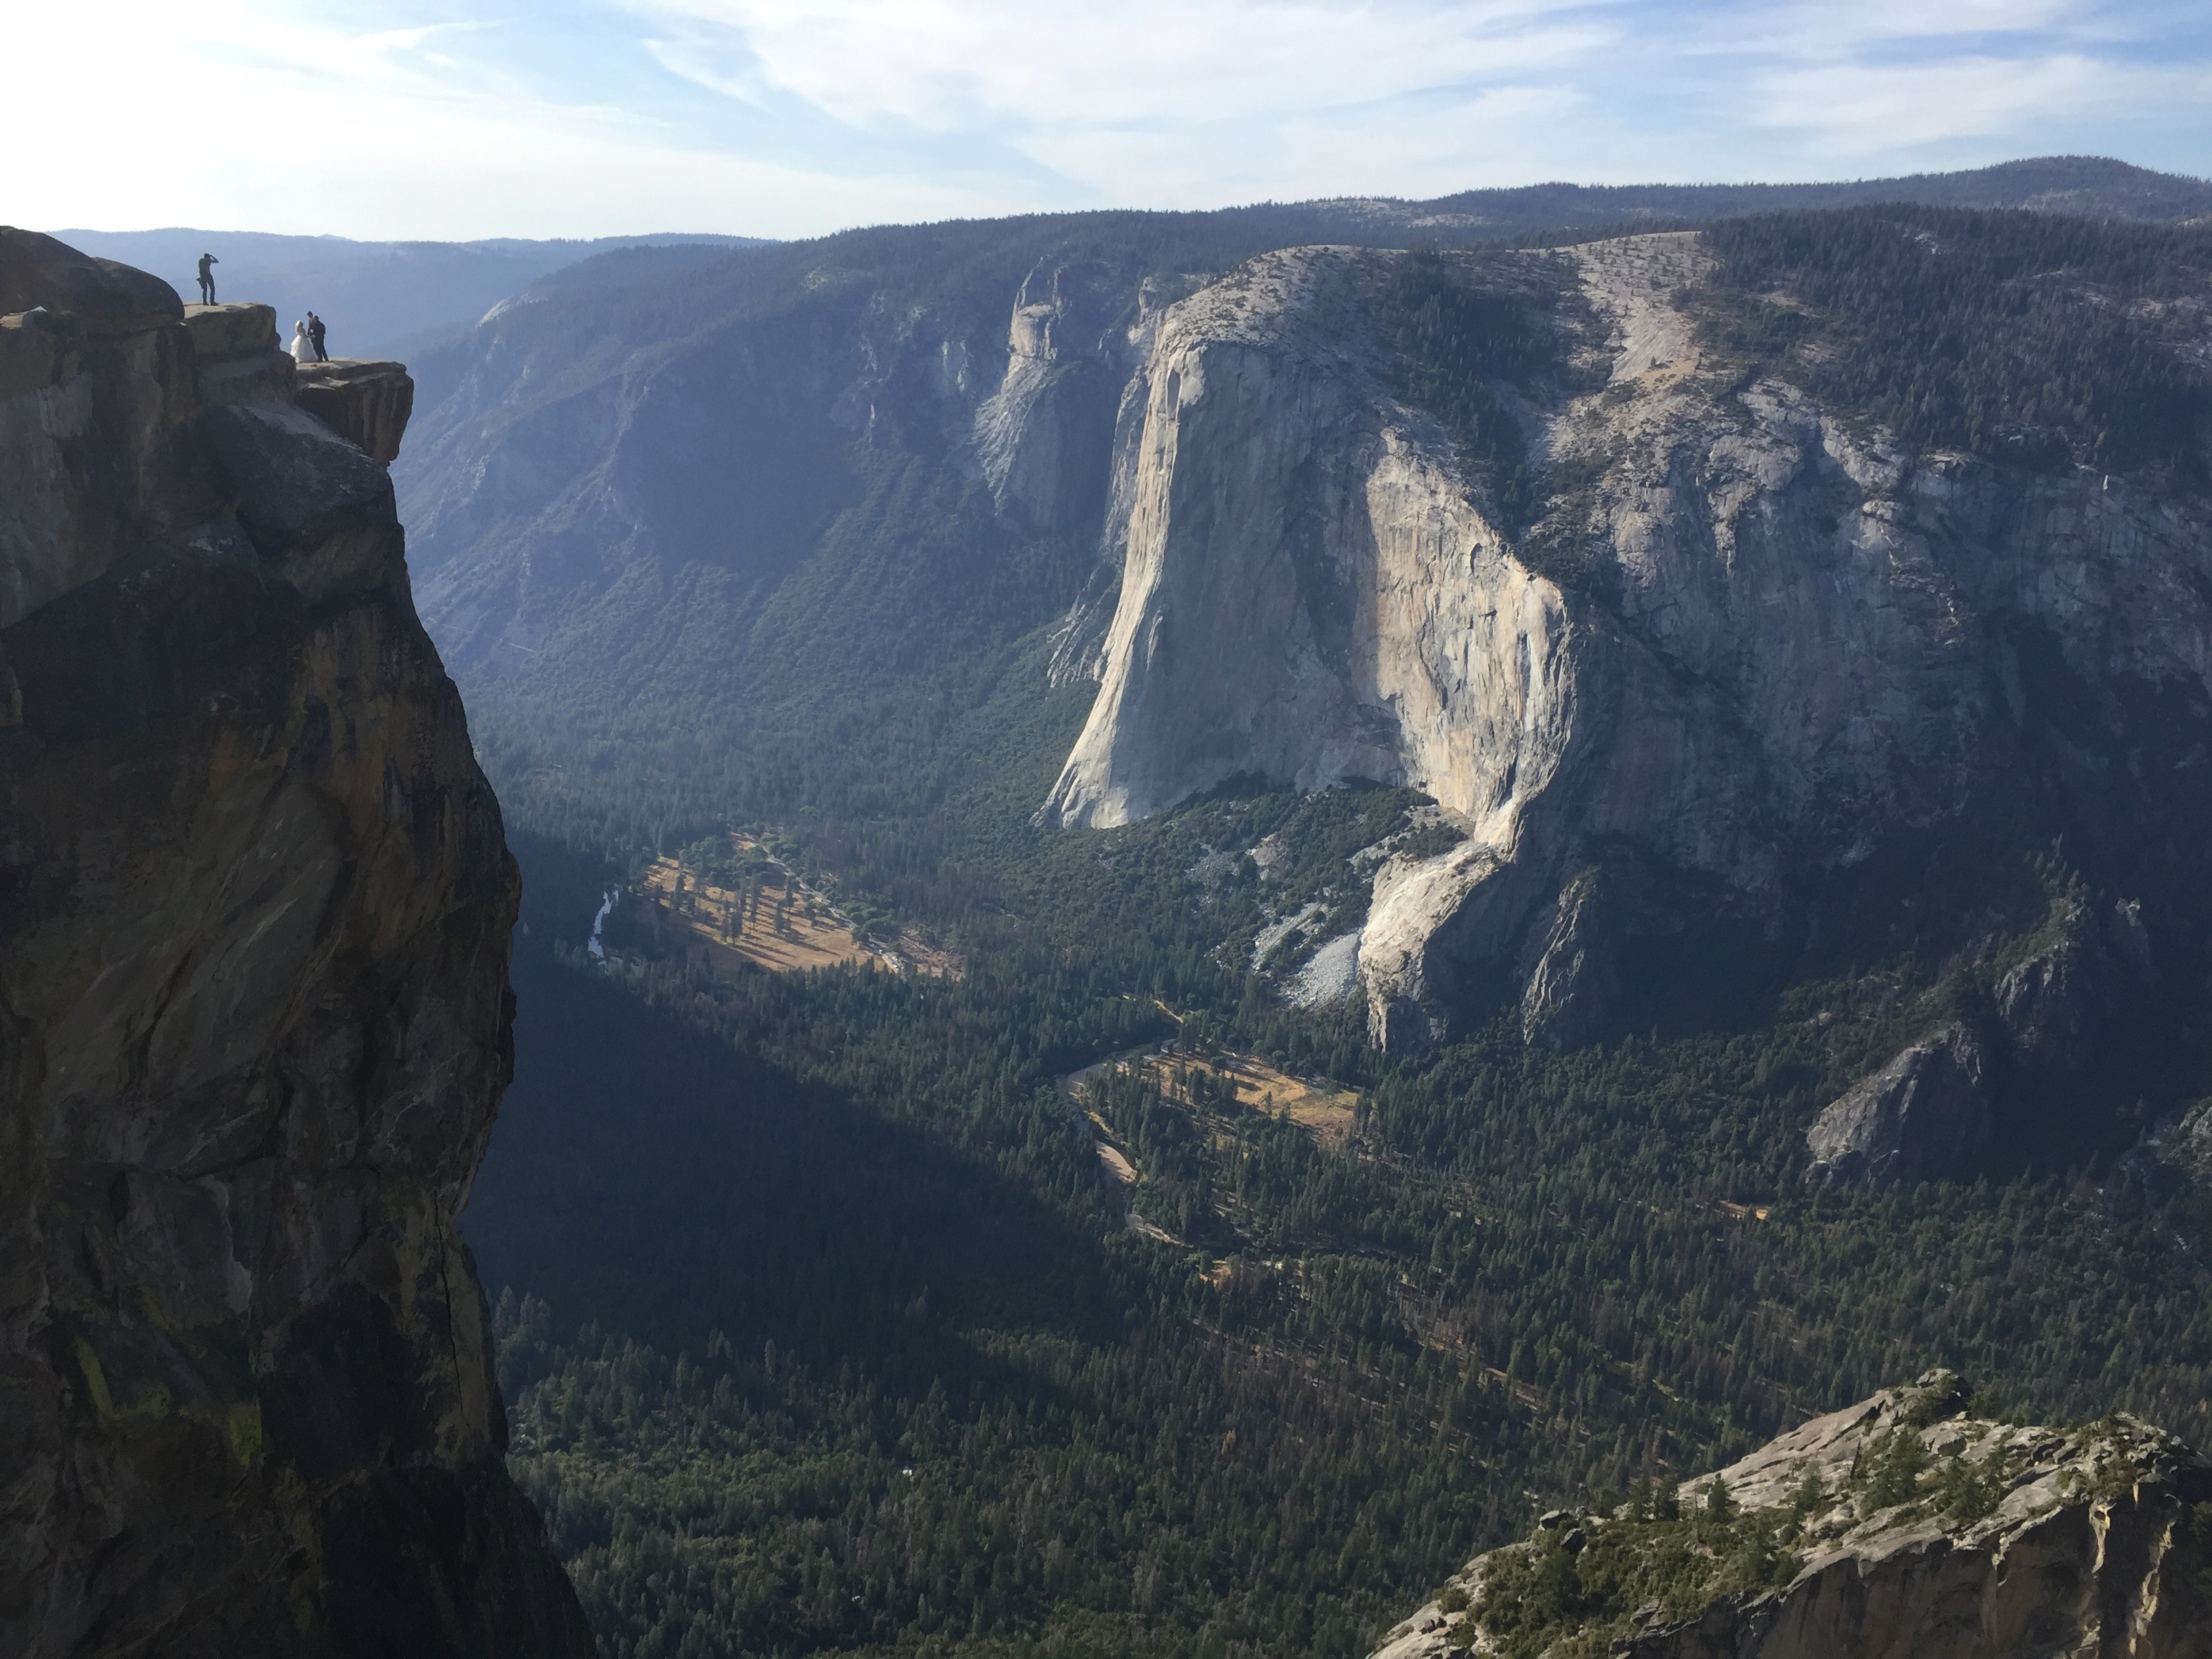 Yosemite Park Rangers Recover Bodies of 2 Who Fell to Deaths